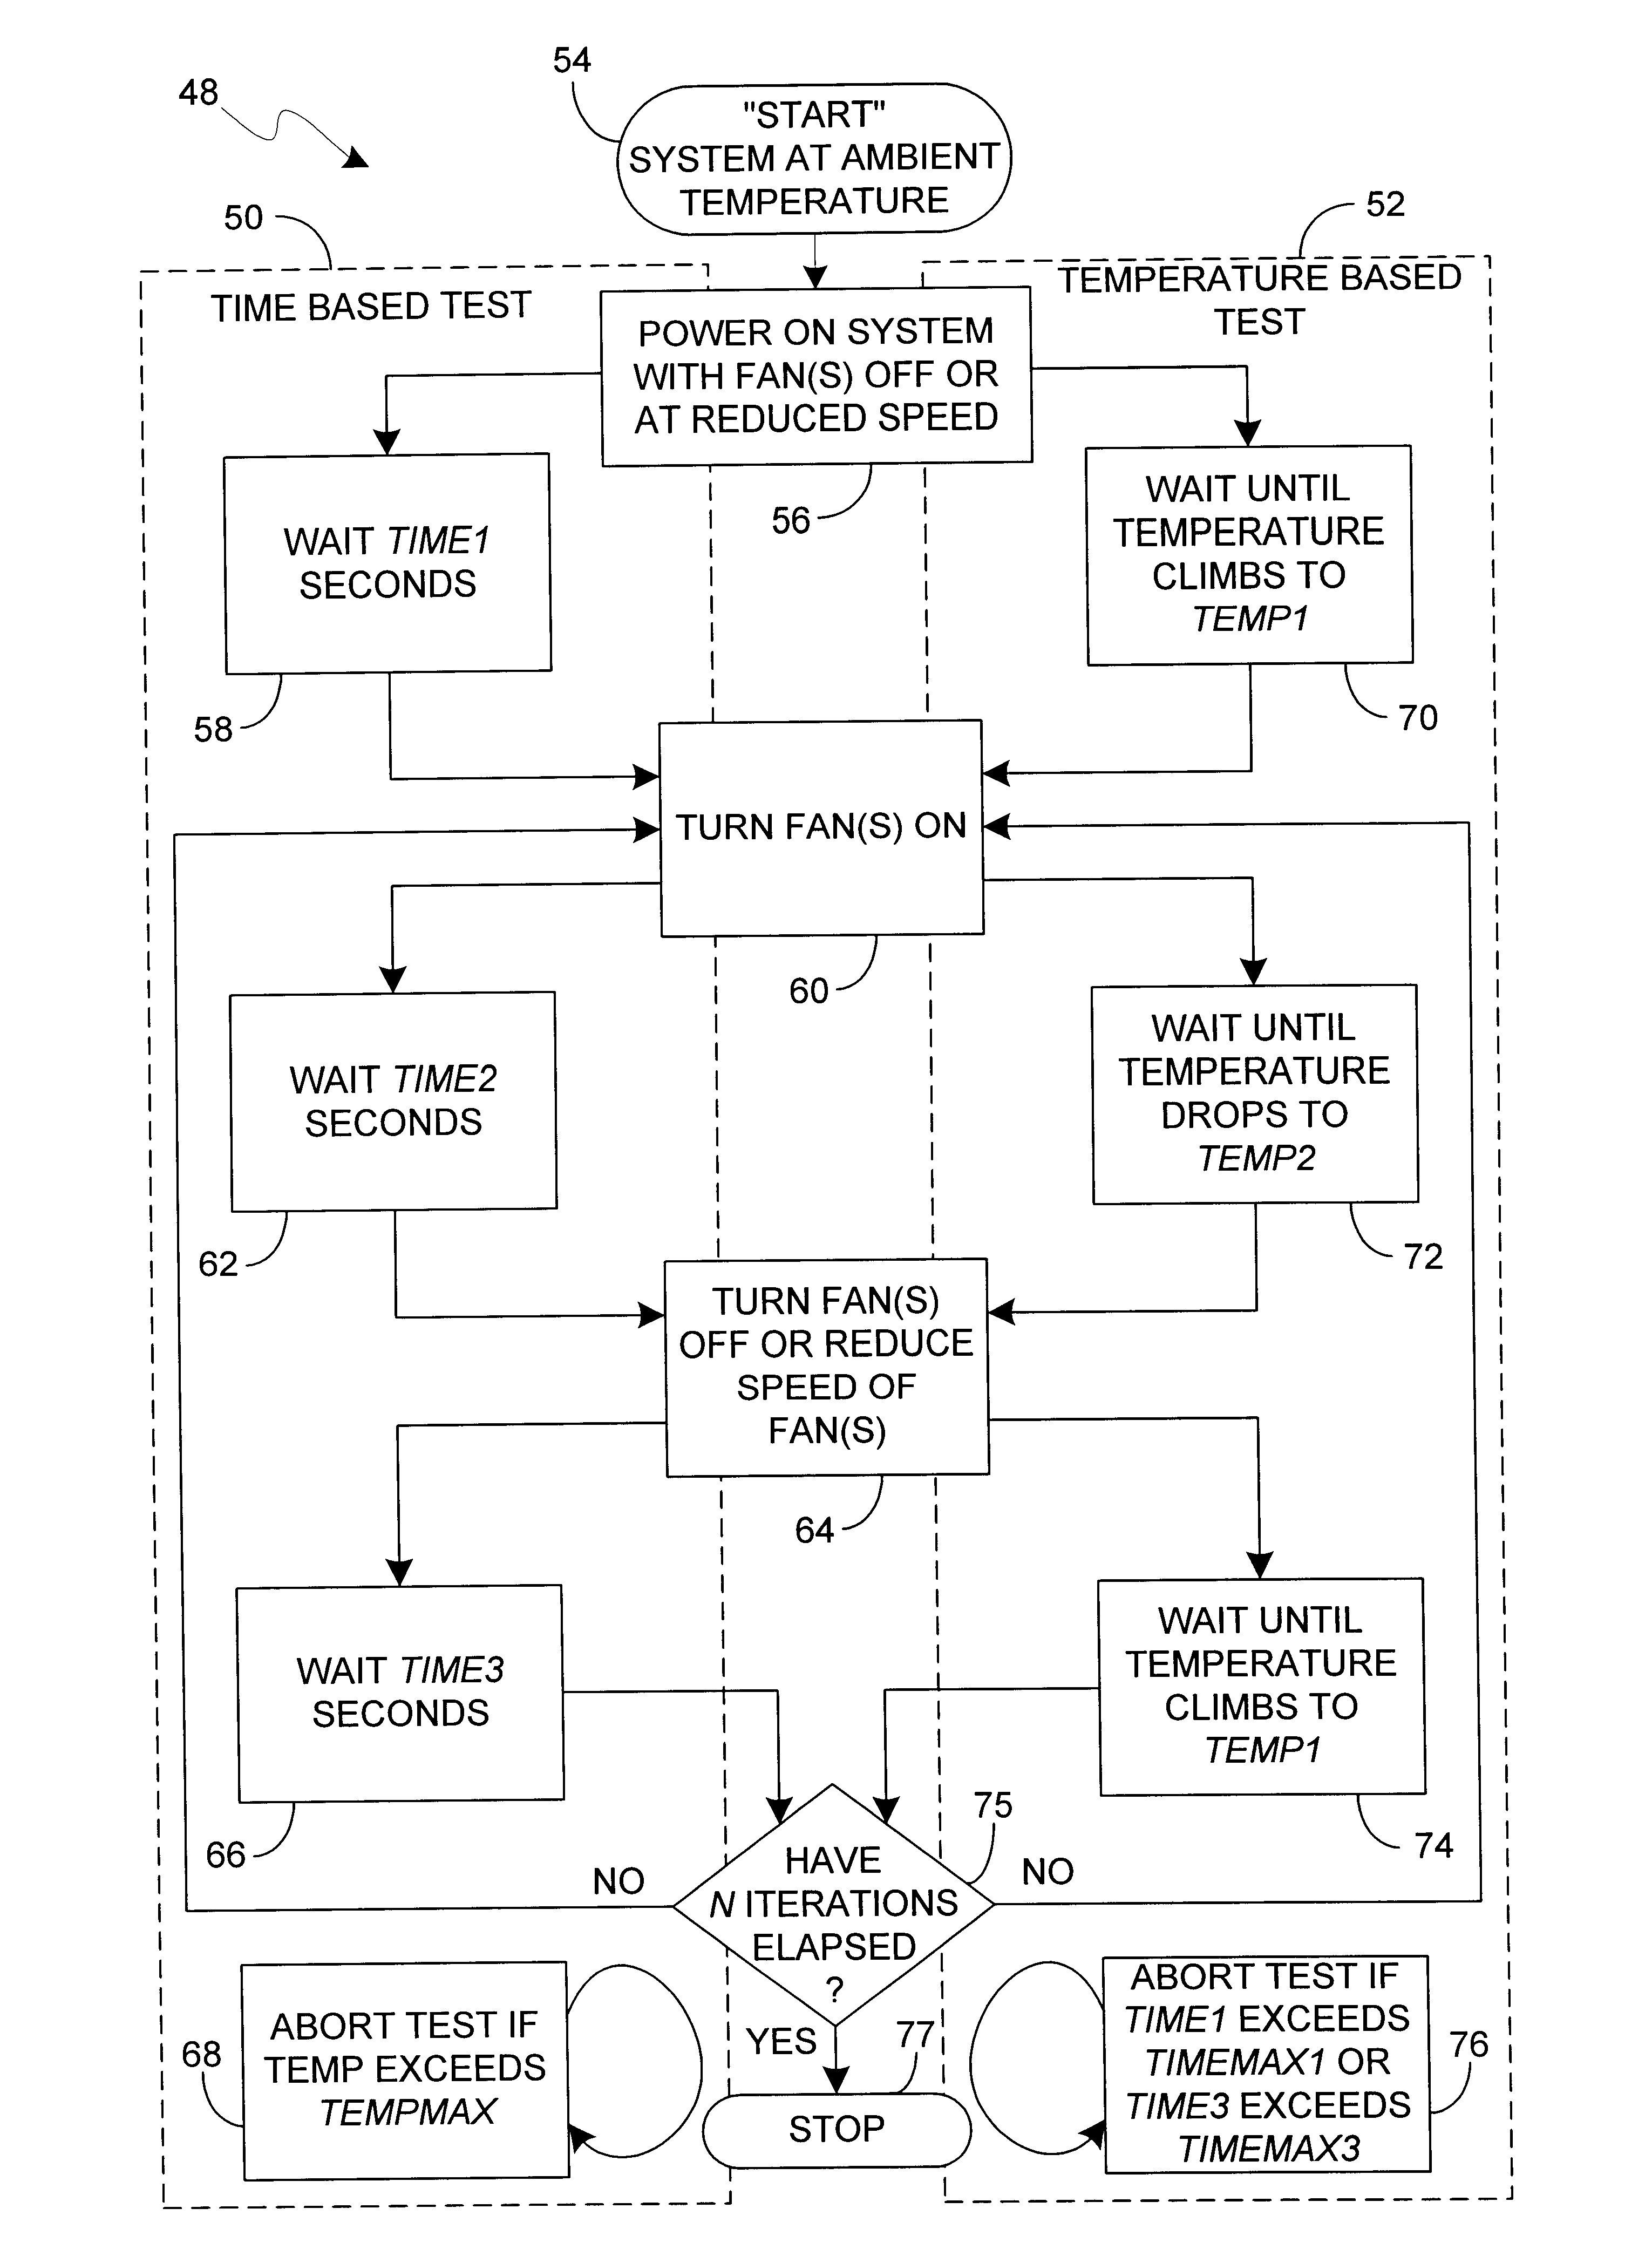 Method and apparatus for controlling fans and power supplies to provide accelerated run-in testing